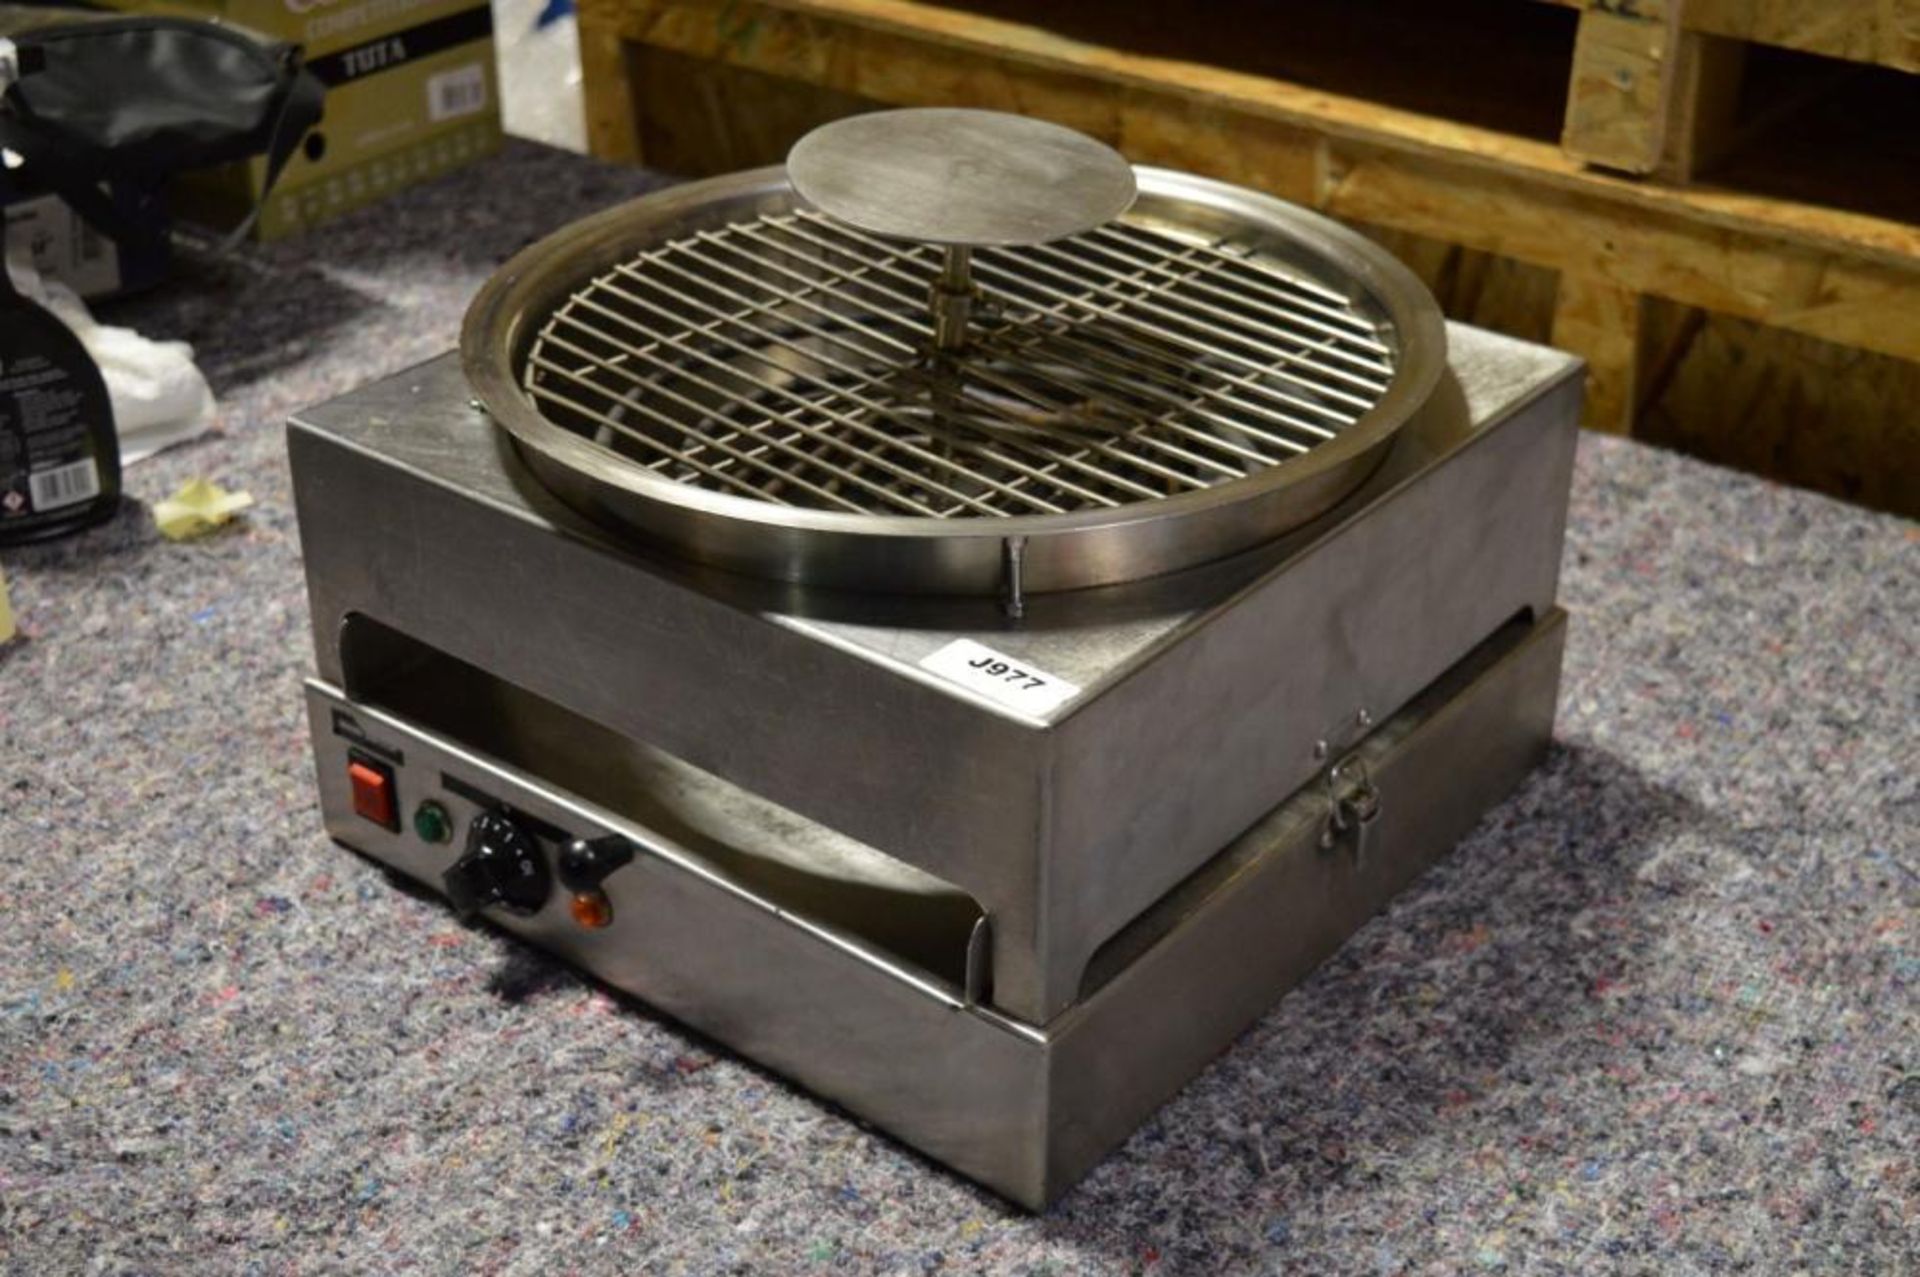 1 x Mantle Countertop Pizza Capper - As used in Supermarkets For Sealing In-House Pizzas - Stainless - Image 4 of 5